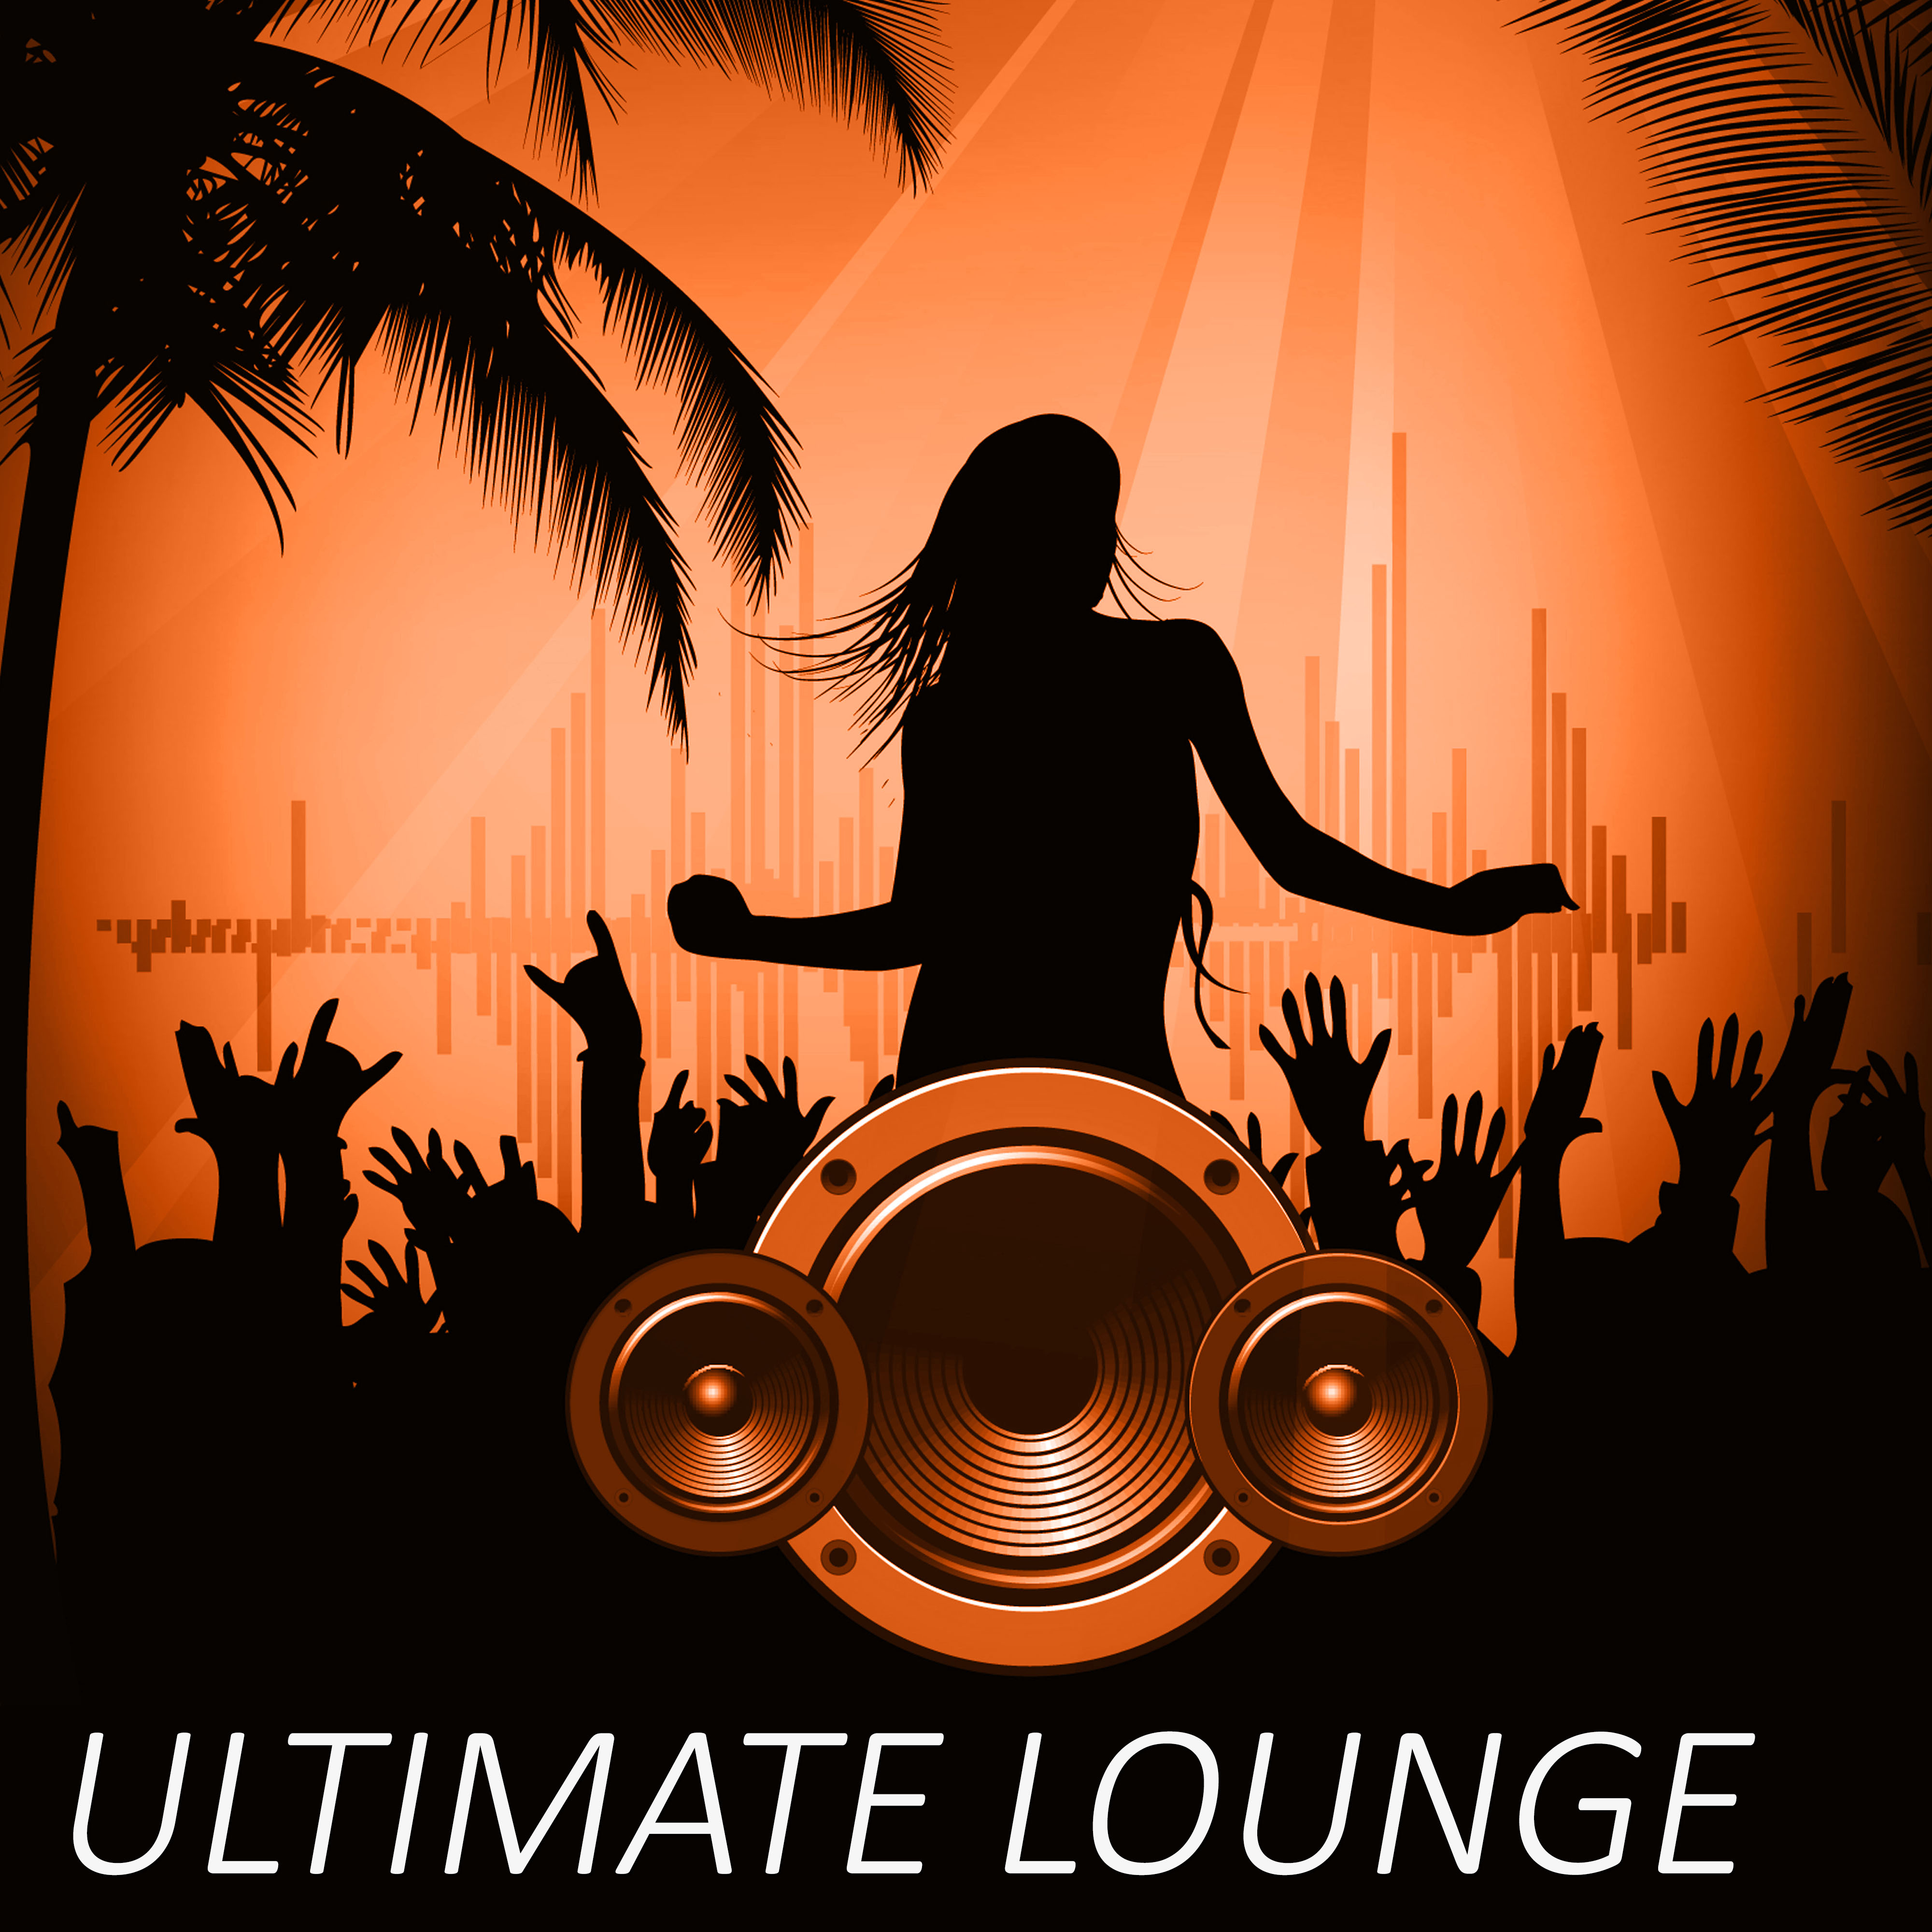 Ultimate Lounge – Calming Chill Out Music, Cafe Ibiza, Chill Out Revolution